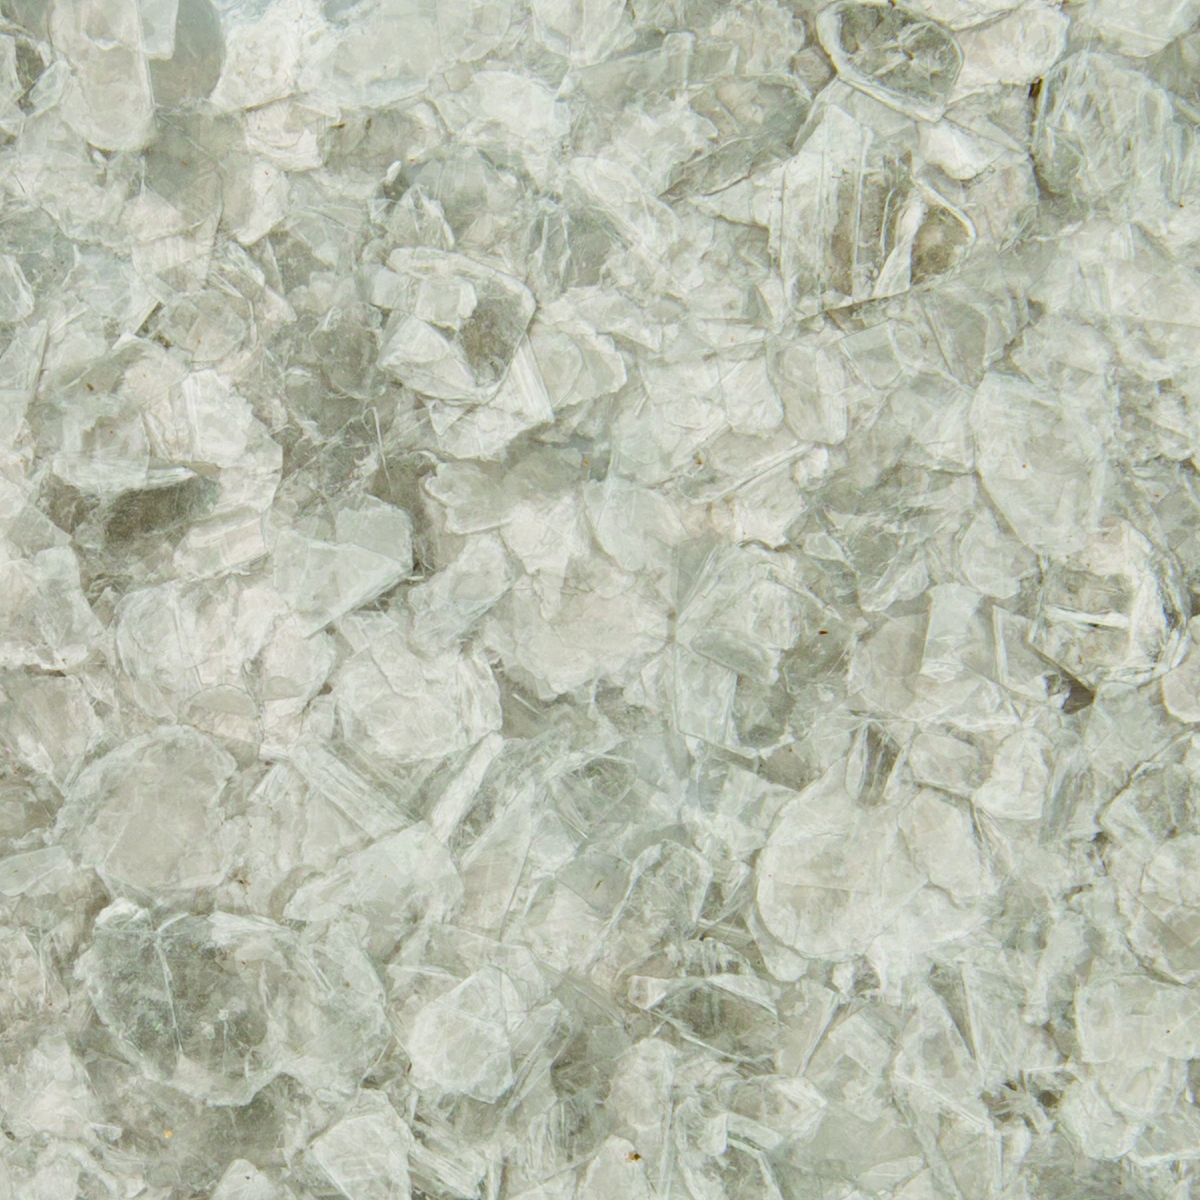 M1070-CLEAR Mica Flakes